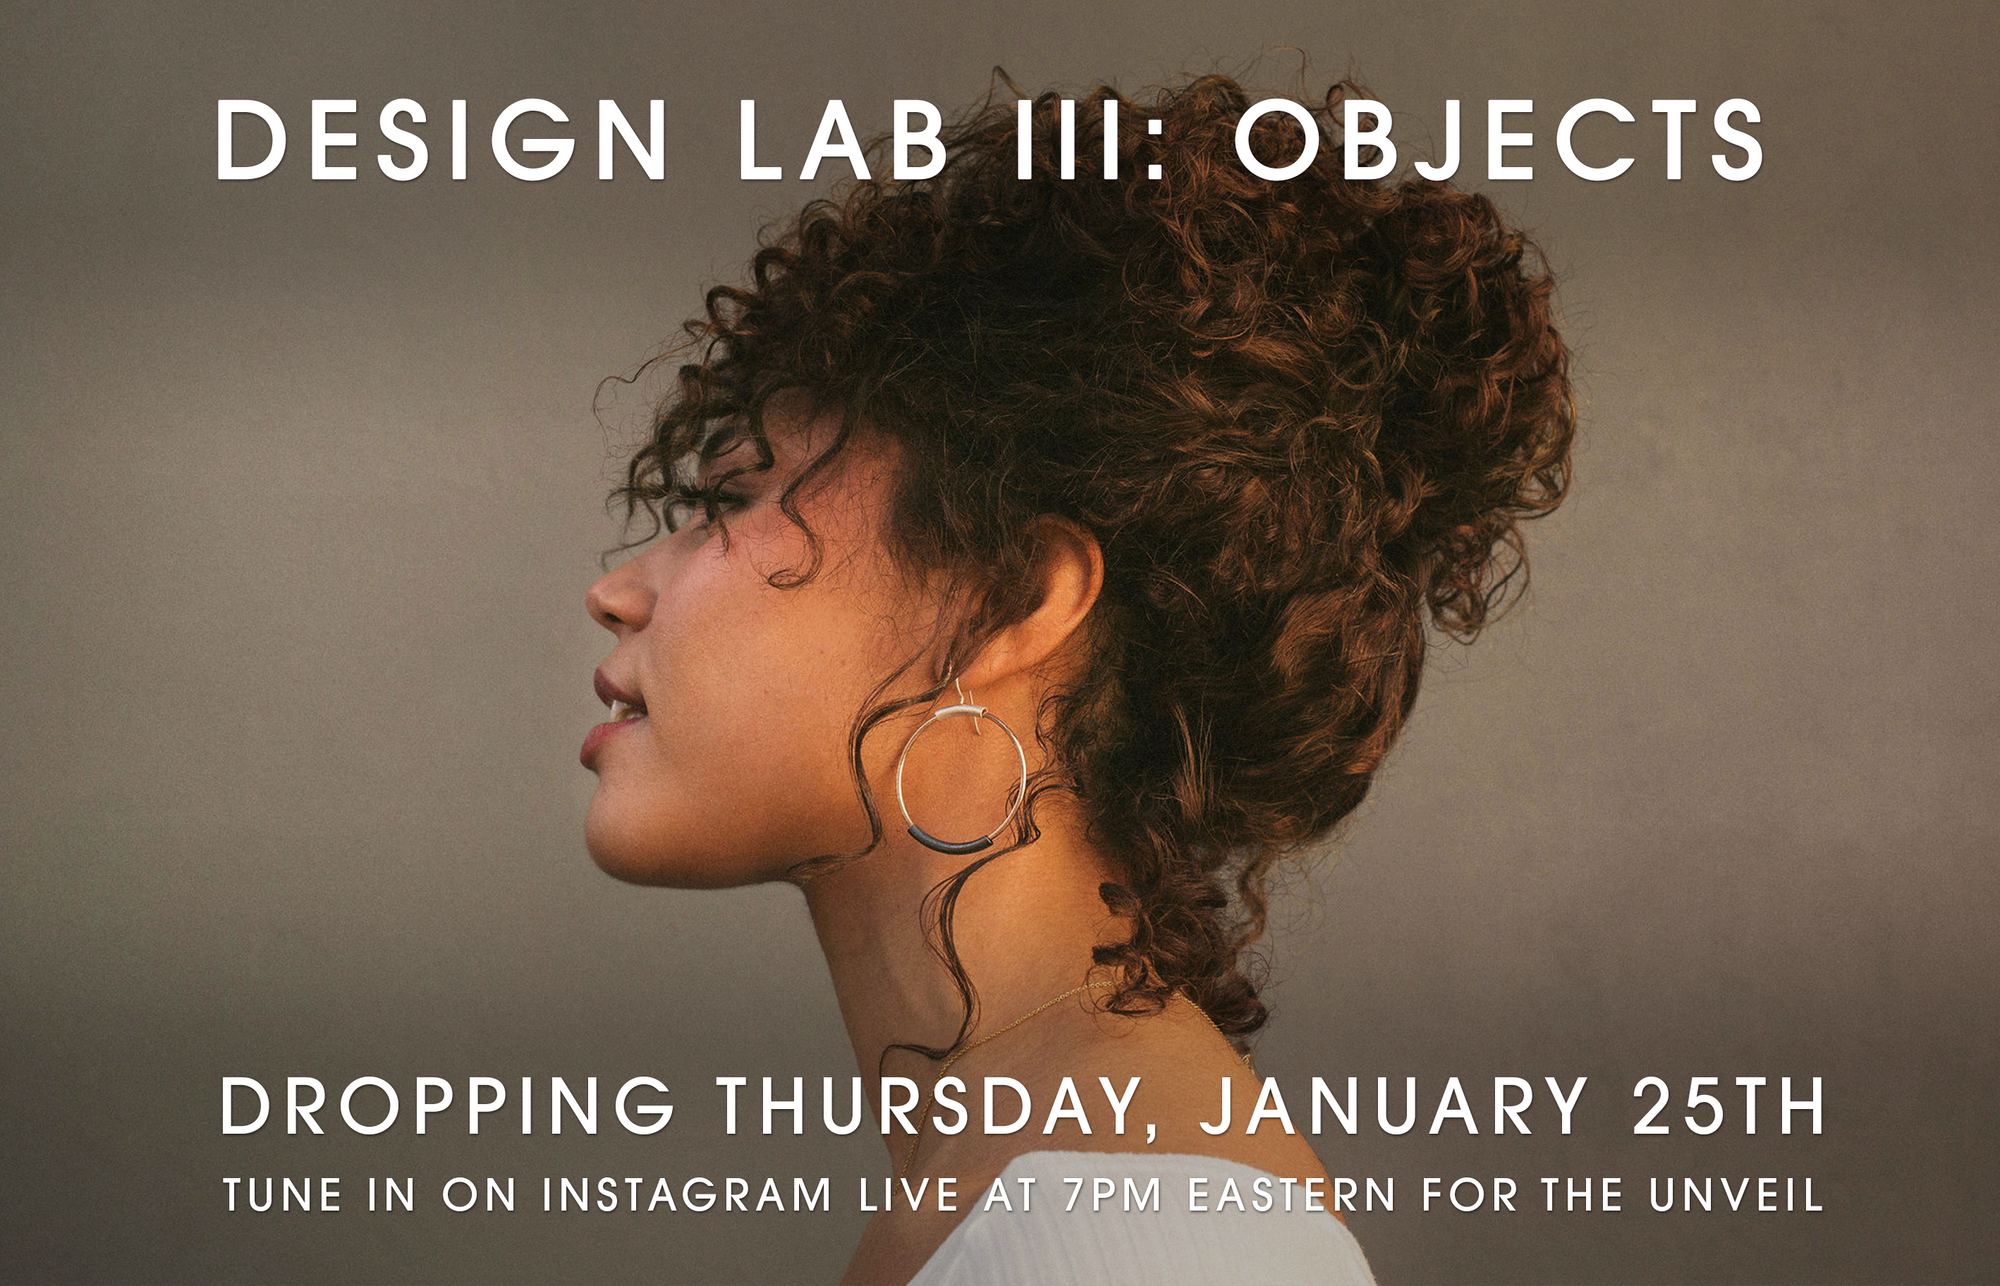 Jewery as an Object: Introducing Design Lab III